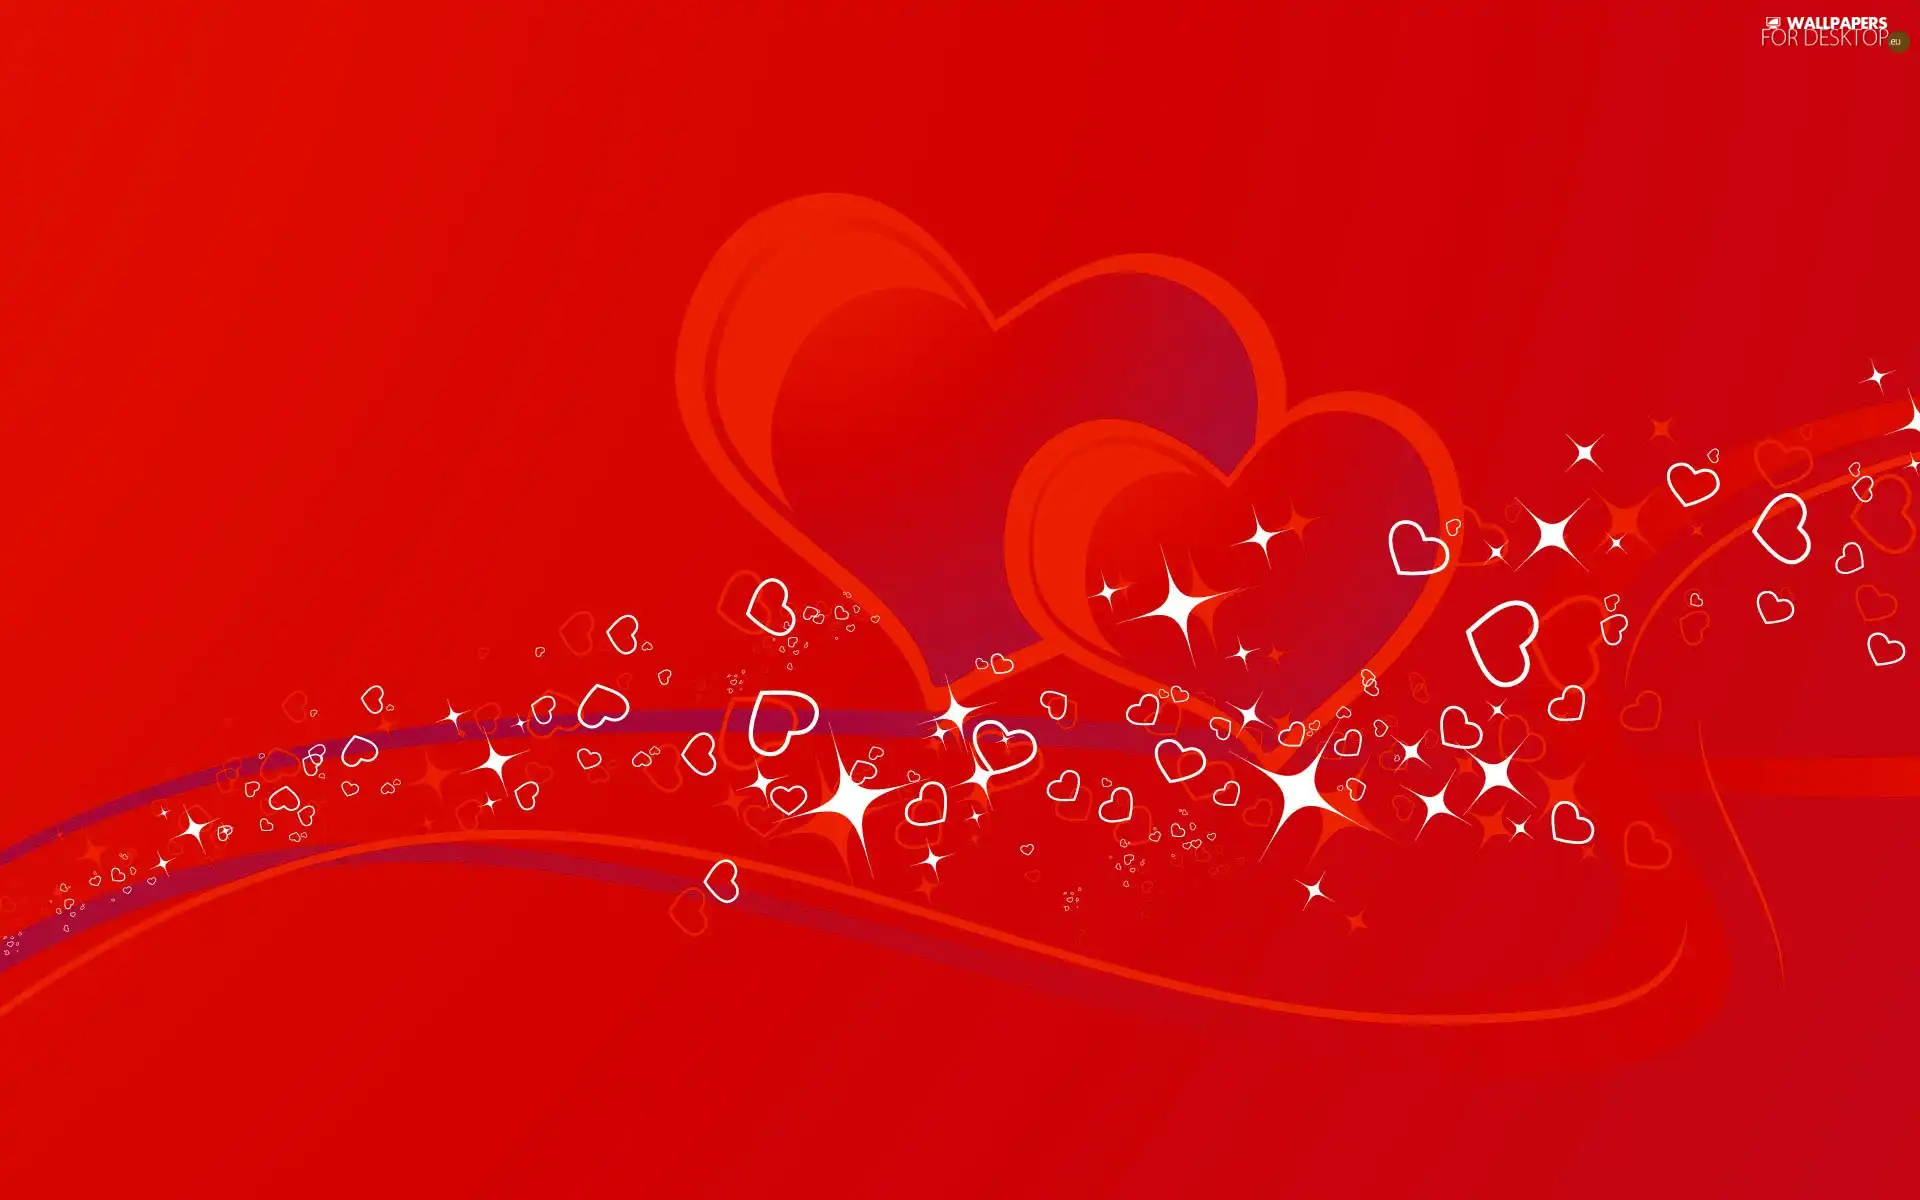 heart, Red, background, Stars